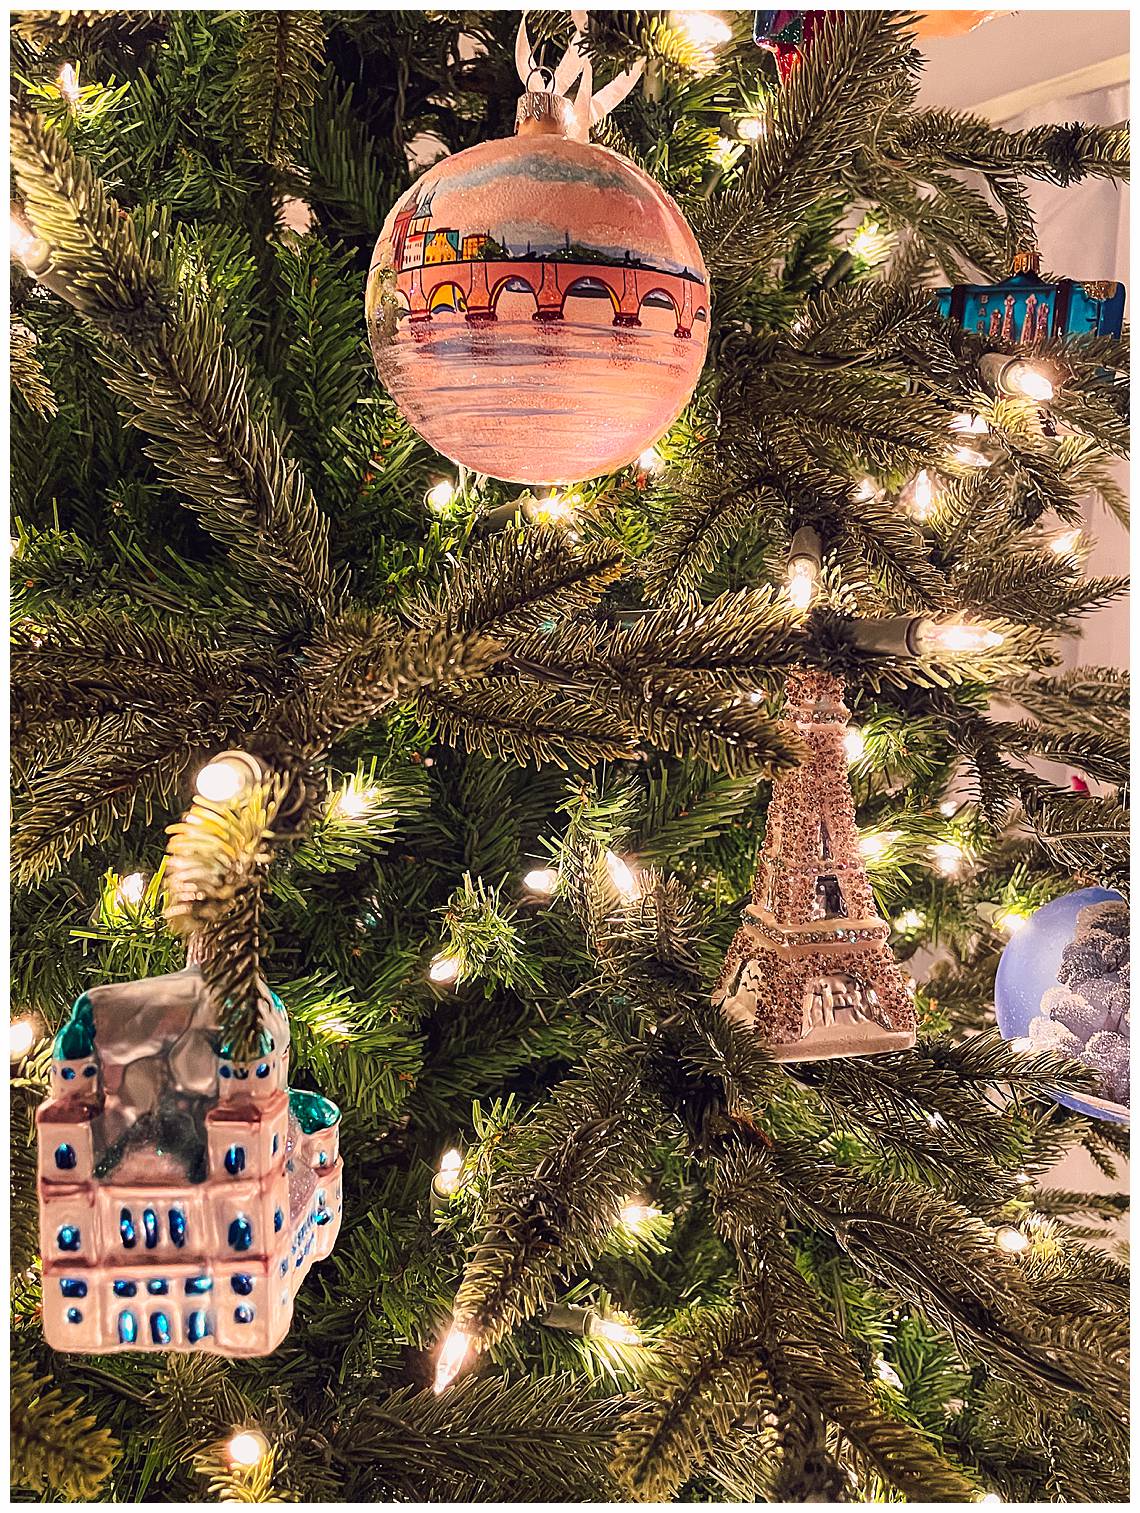 Thinking about creating a travel Christmas tree to remember your travels?  Click here for ideas on where to find travel Christmas ornaments when you're home!